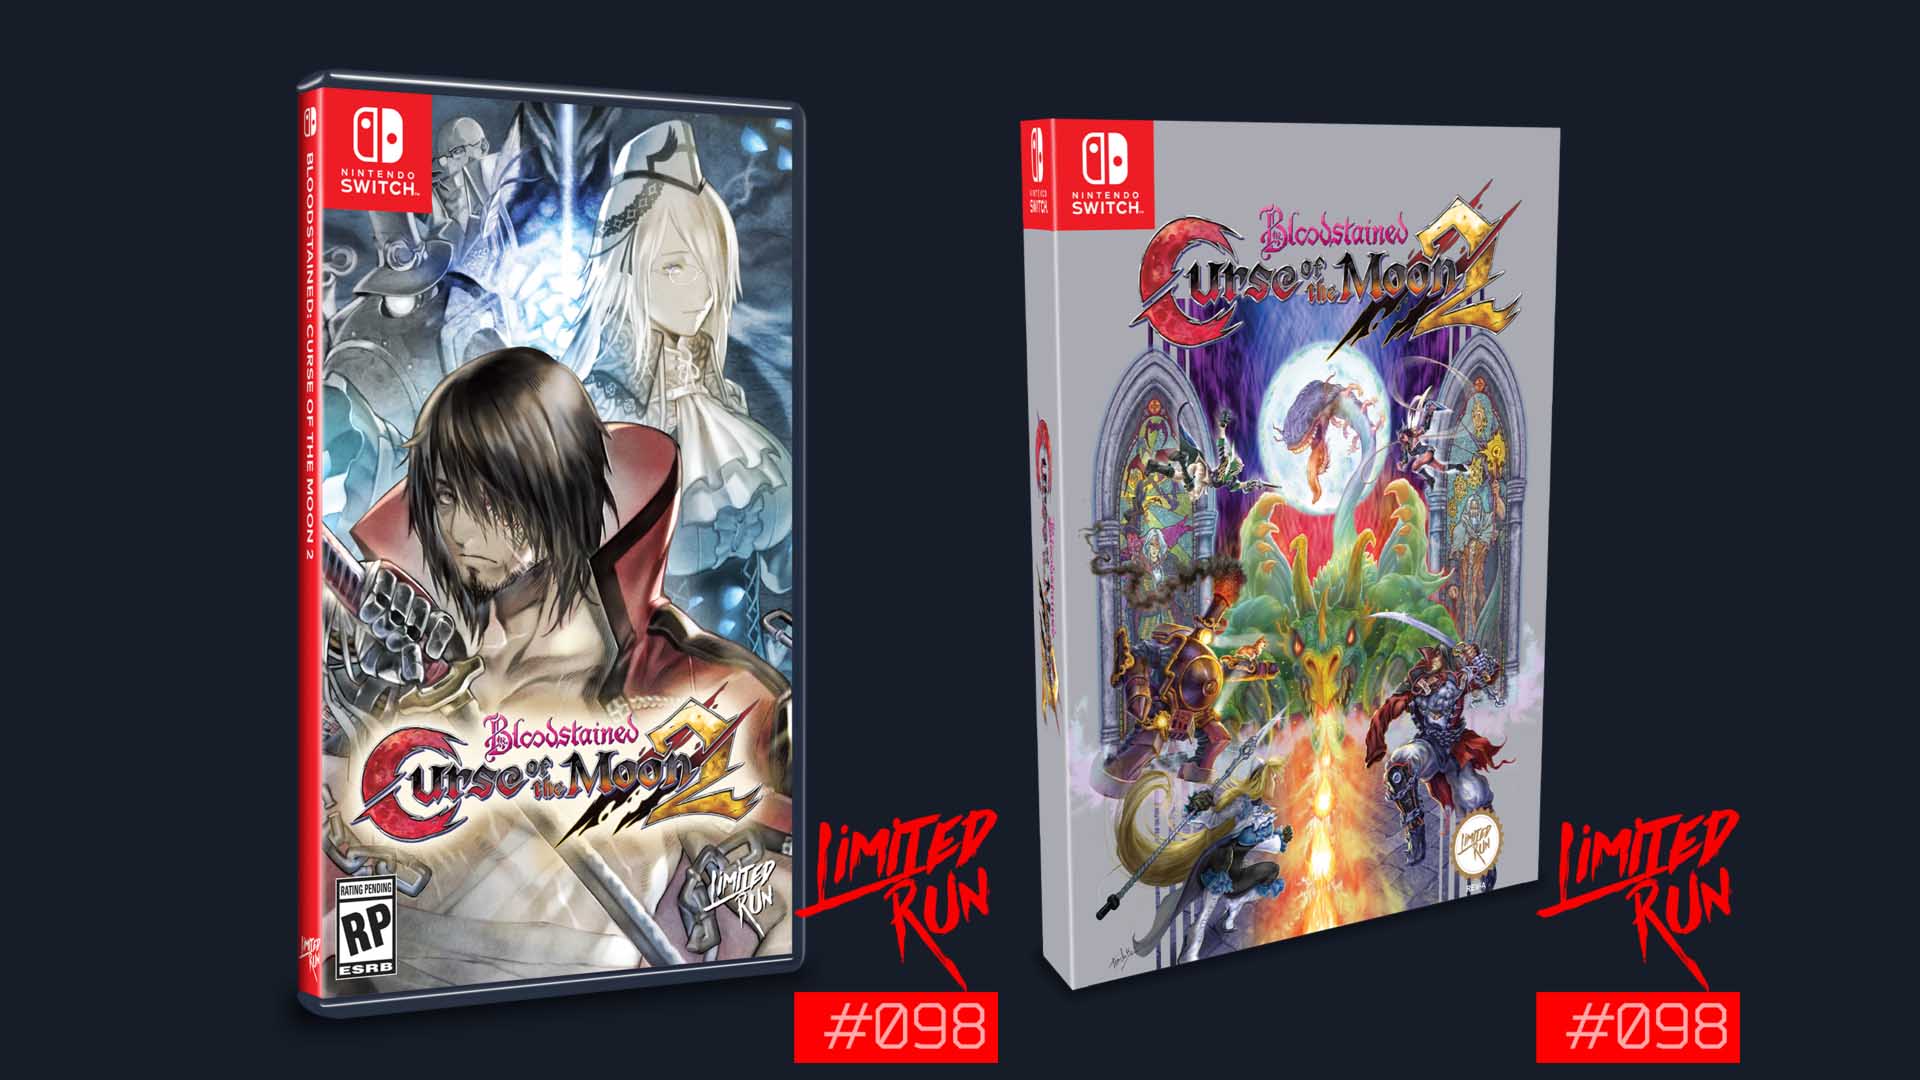 bloodstained curse of the moon 2 physical release